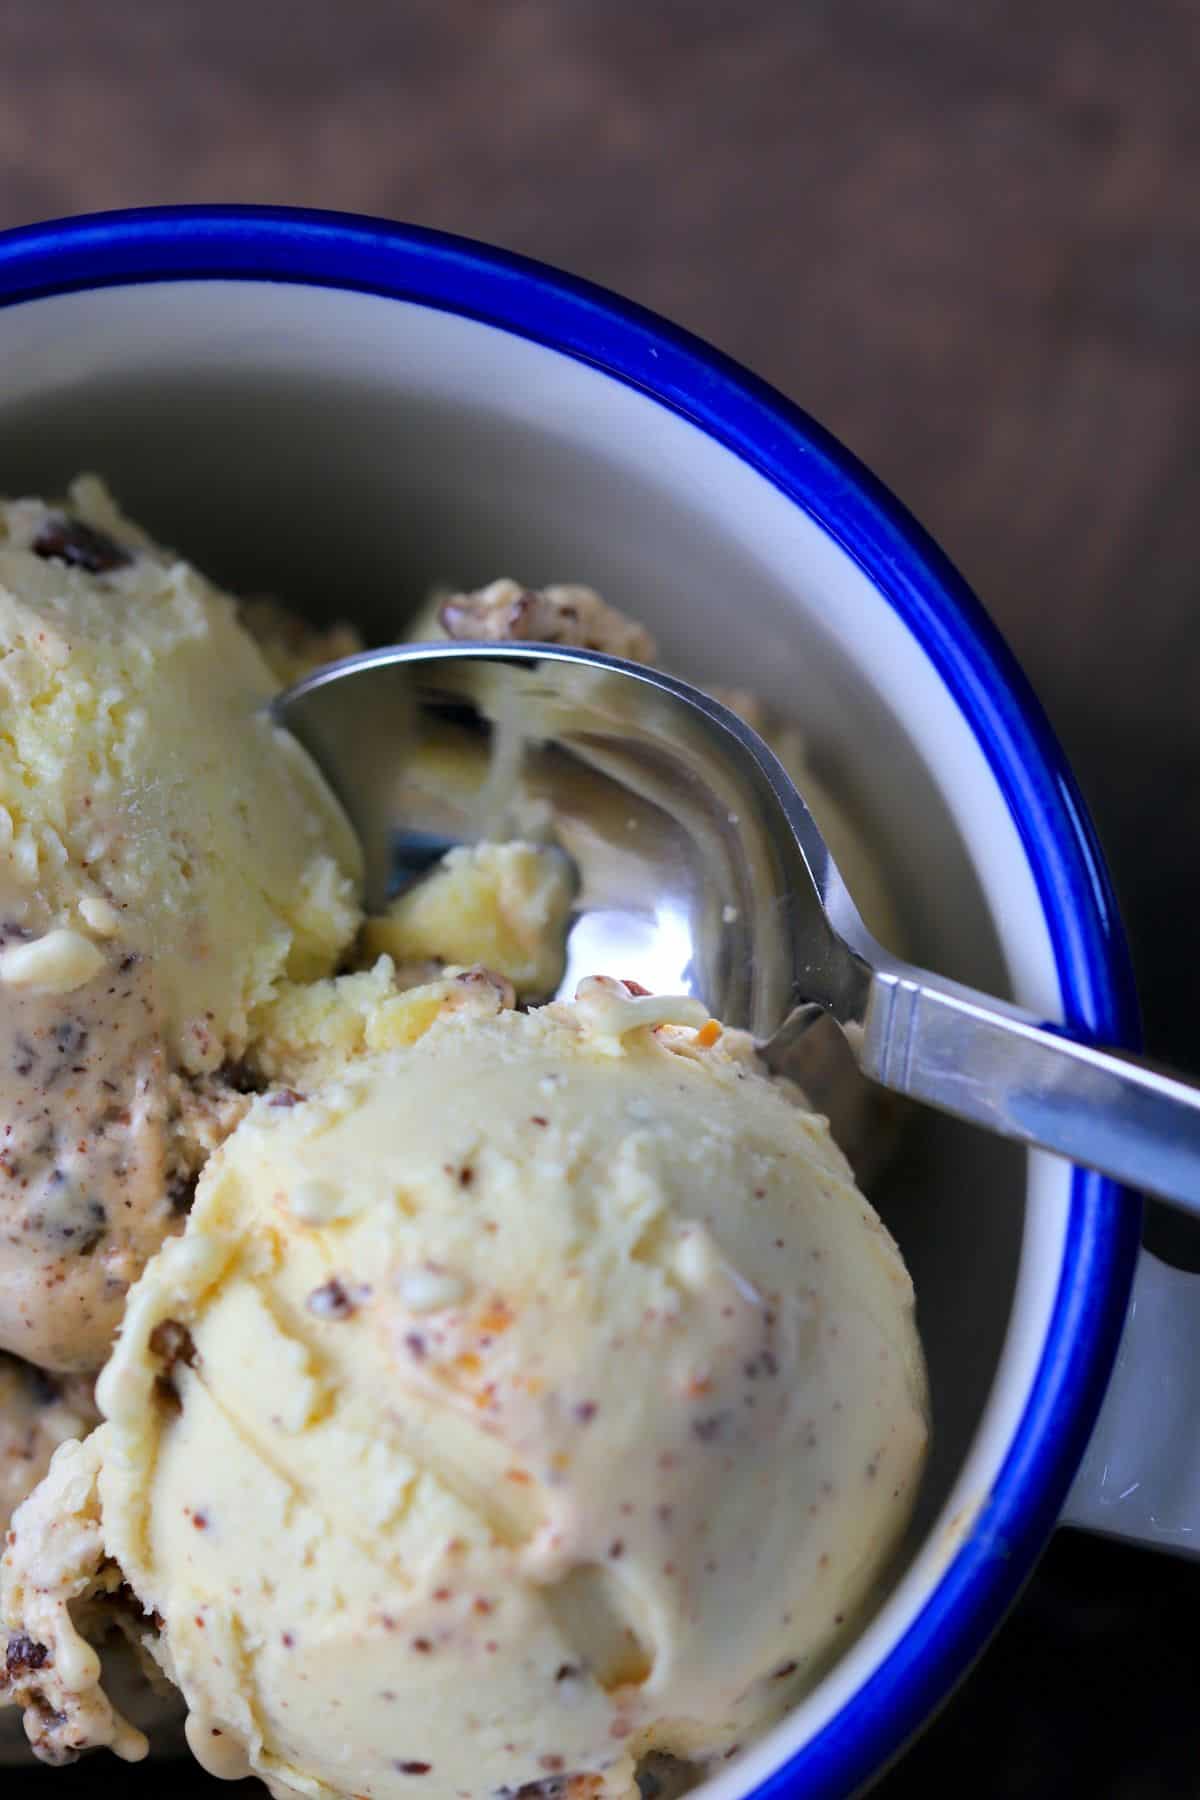 two scoops of ice cream in a yellow bowl with a blue rim.